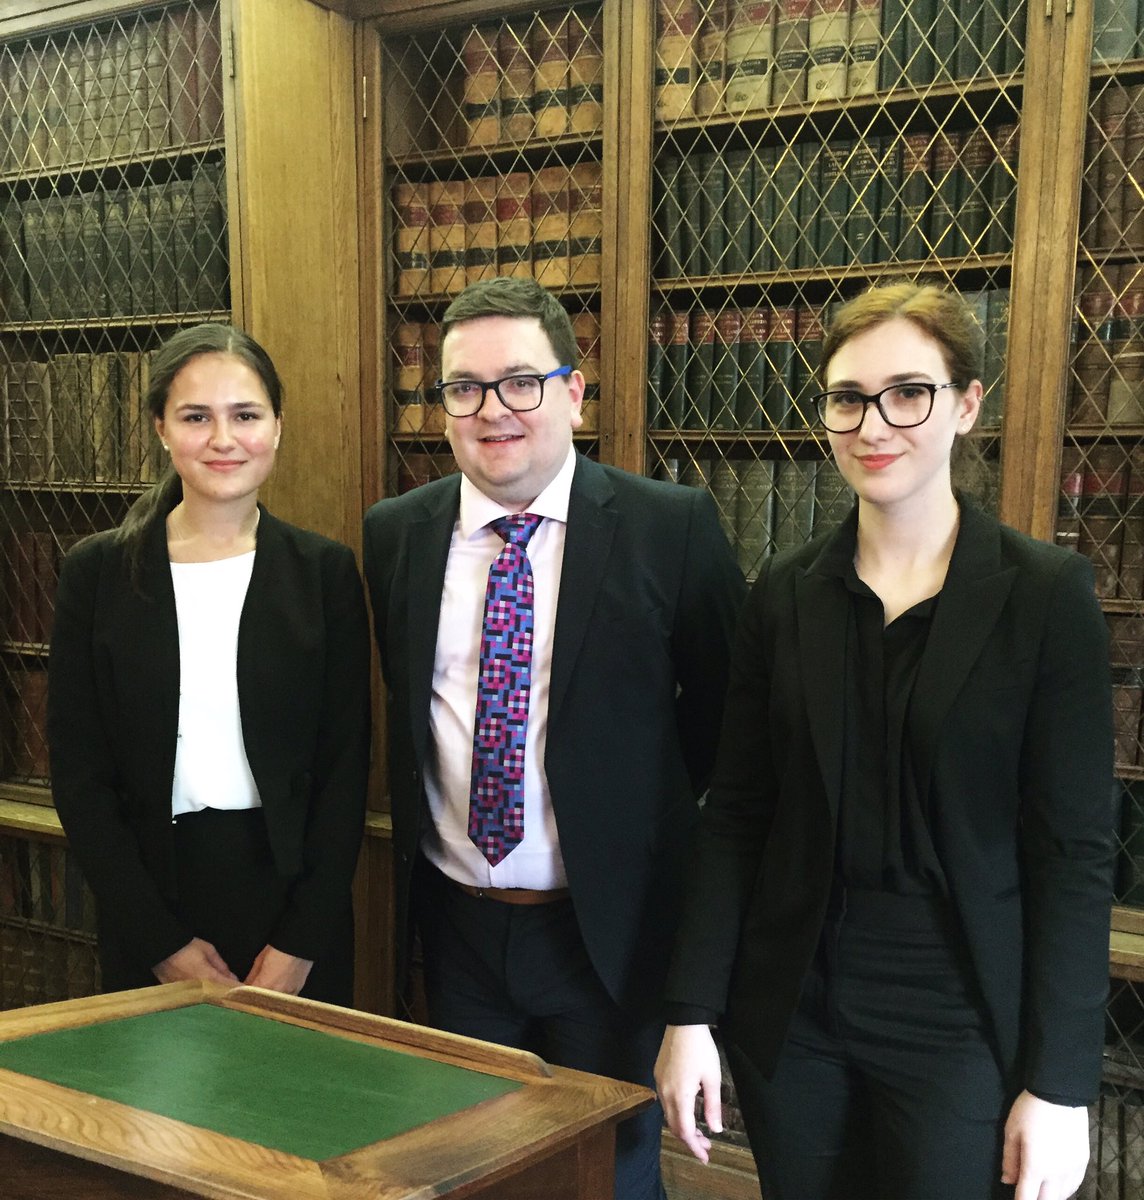 In pictures... Legal research success for WS Society interns